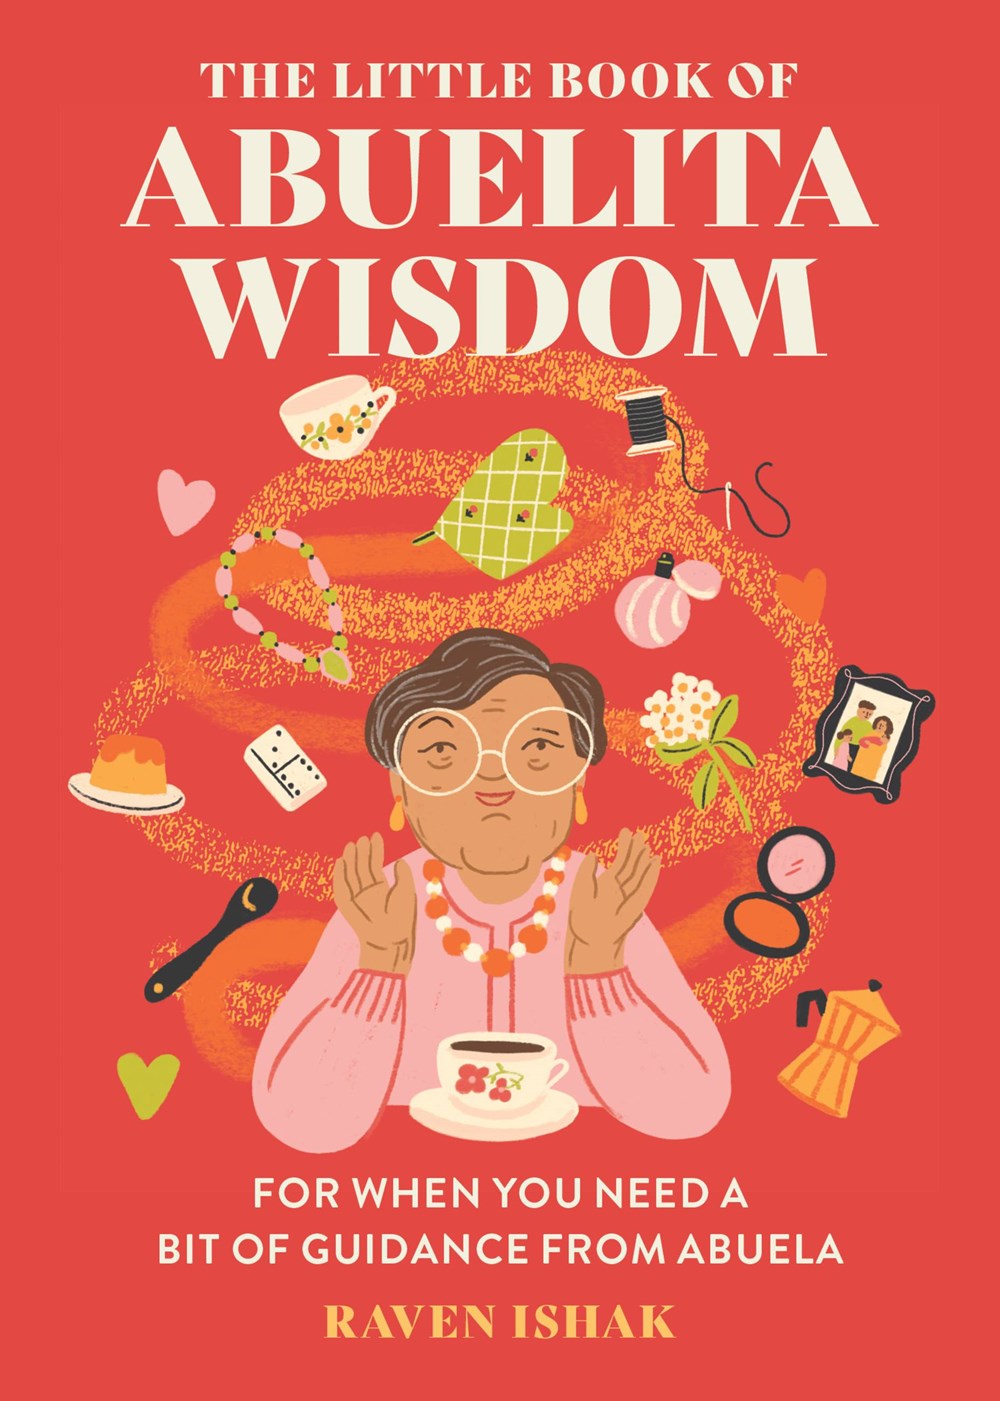 PRE-ORDER: The Little Book of Abuelita Wisdom: For When You Need a Bit of Guidance from Abuela